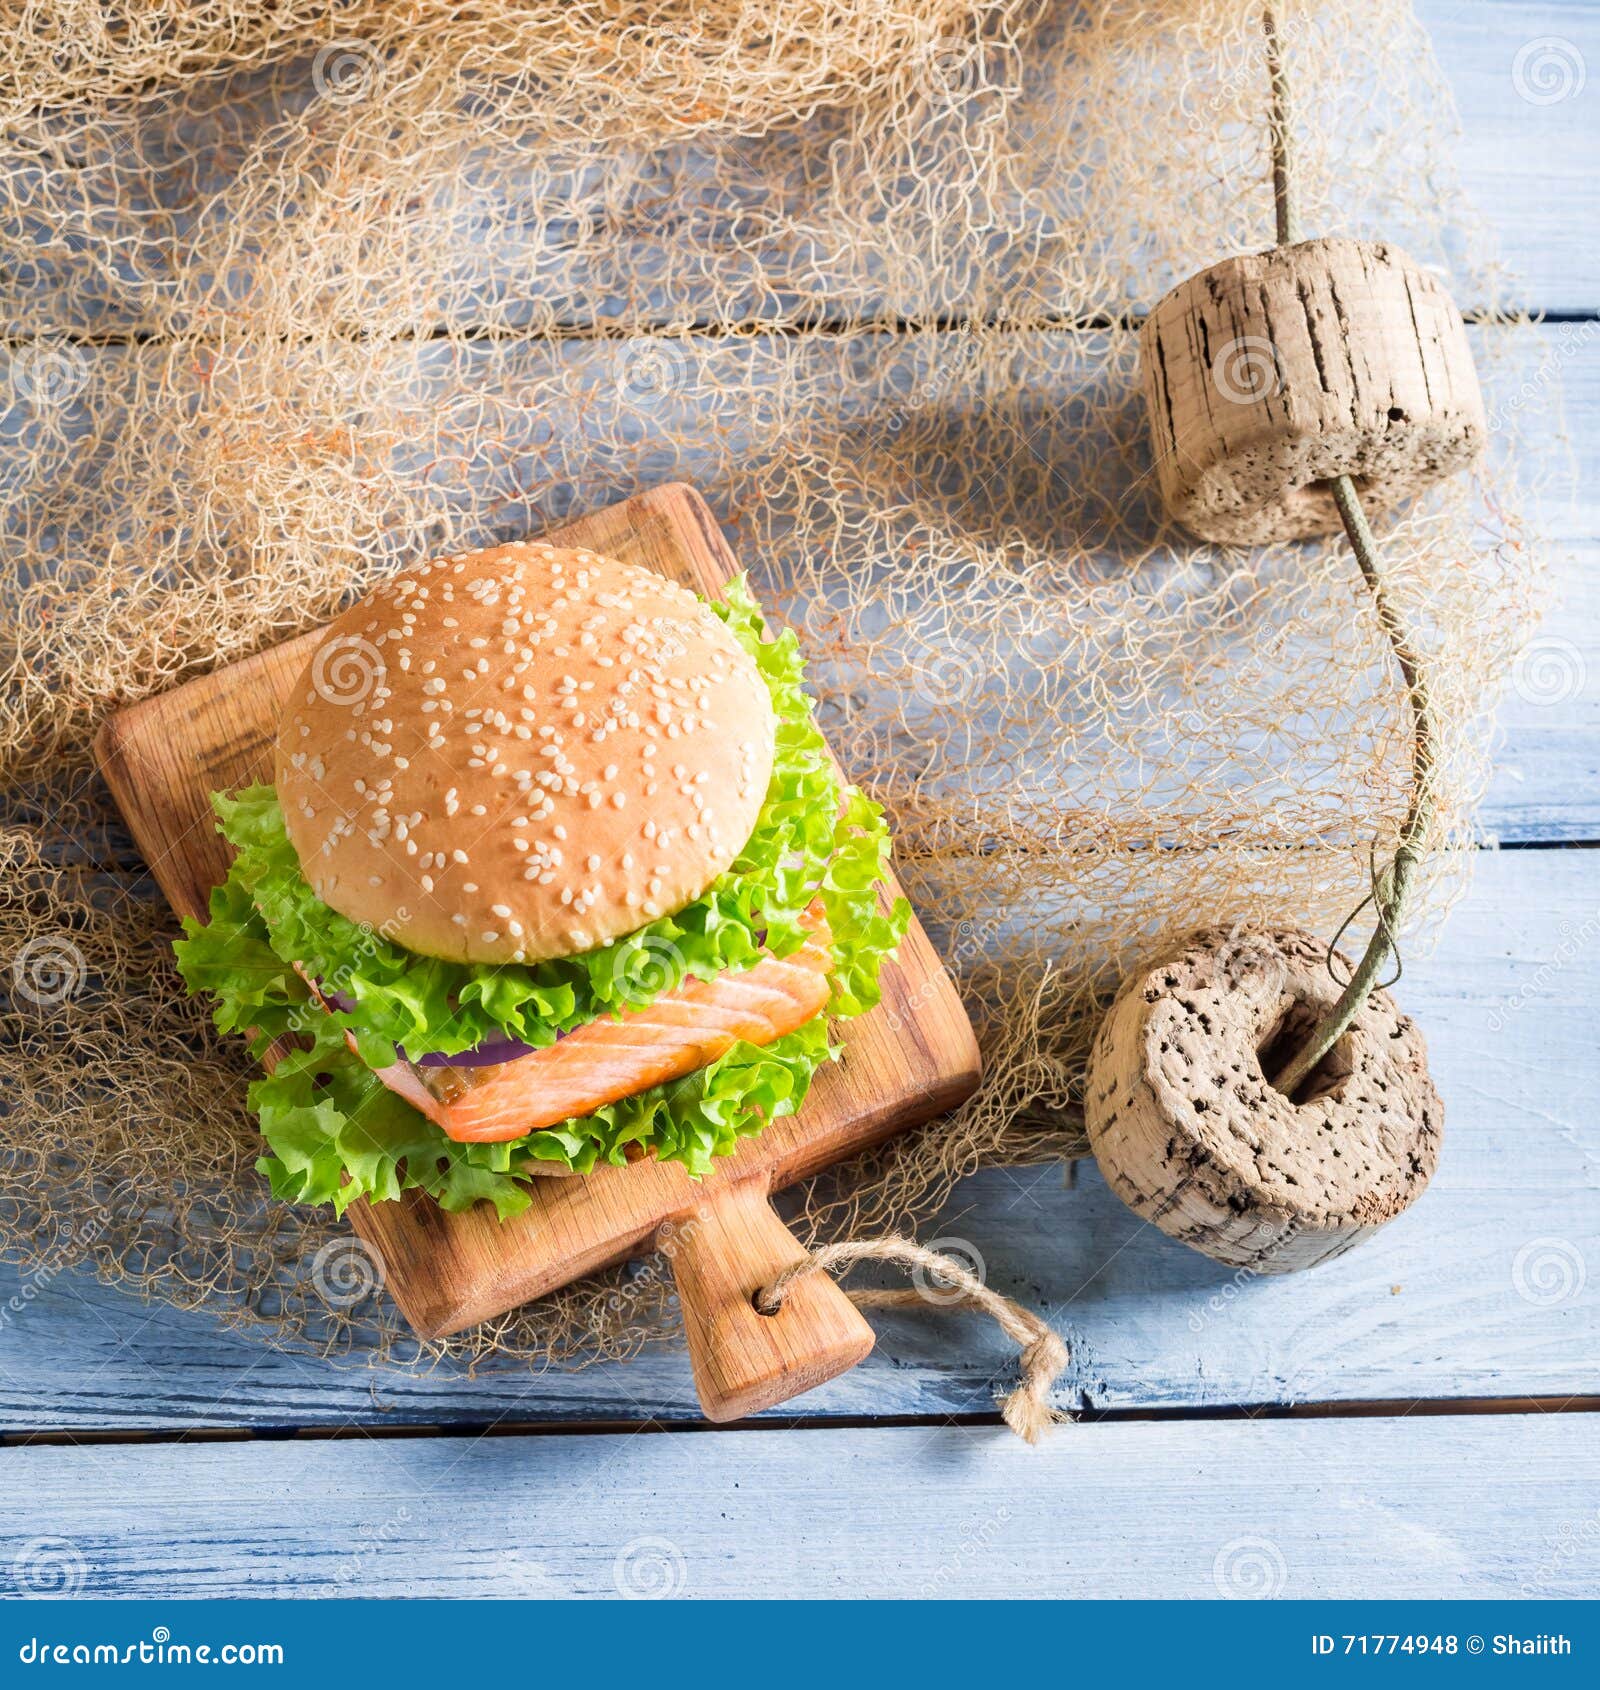 Homemade Burger with Fish and Vegetables on Fishing Net Stock Photo ...